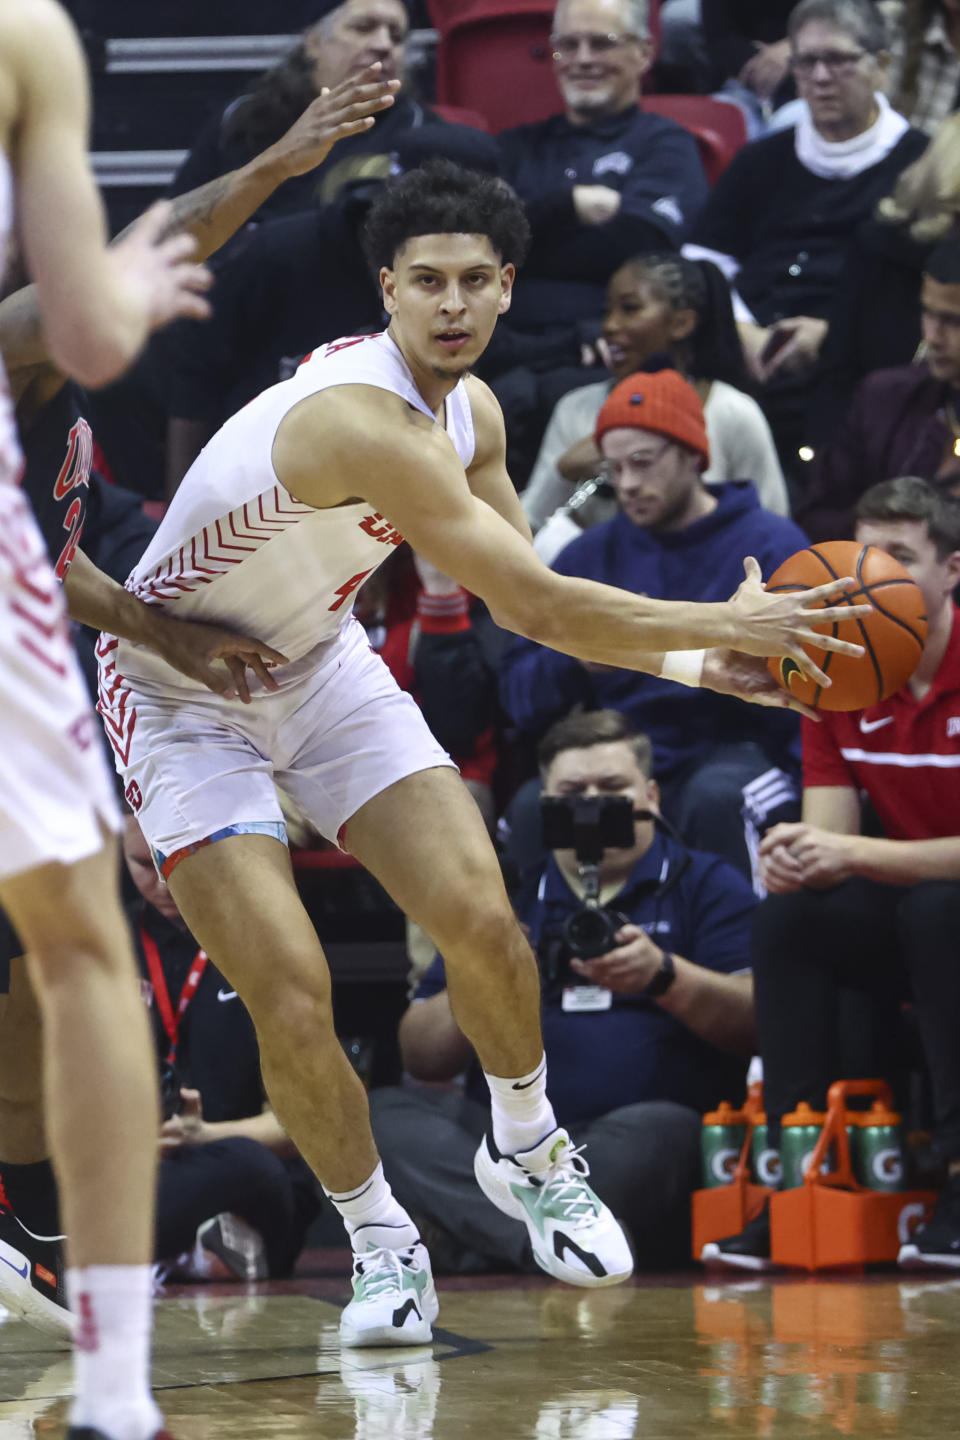 Dayton guard Koby Brea (4) looks to pass the ball during the first half of an NCAA college basketball game against UNLV Tuesday, Nov. 15, 2022, in Las Vegas. (AP Photo/Chase Stevens)